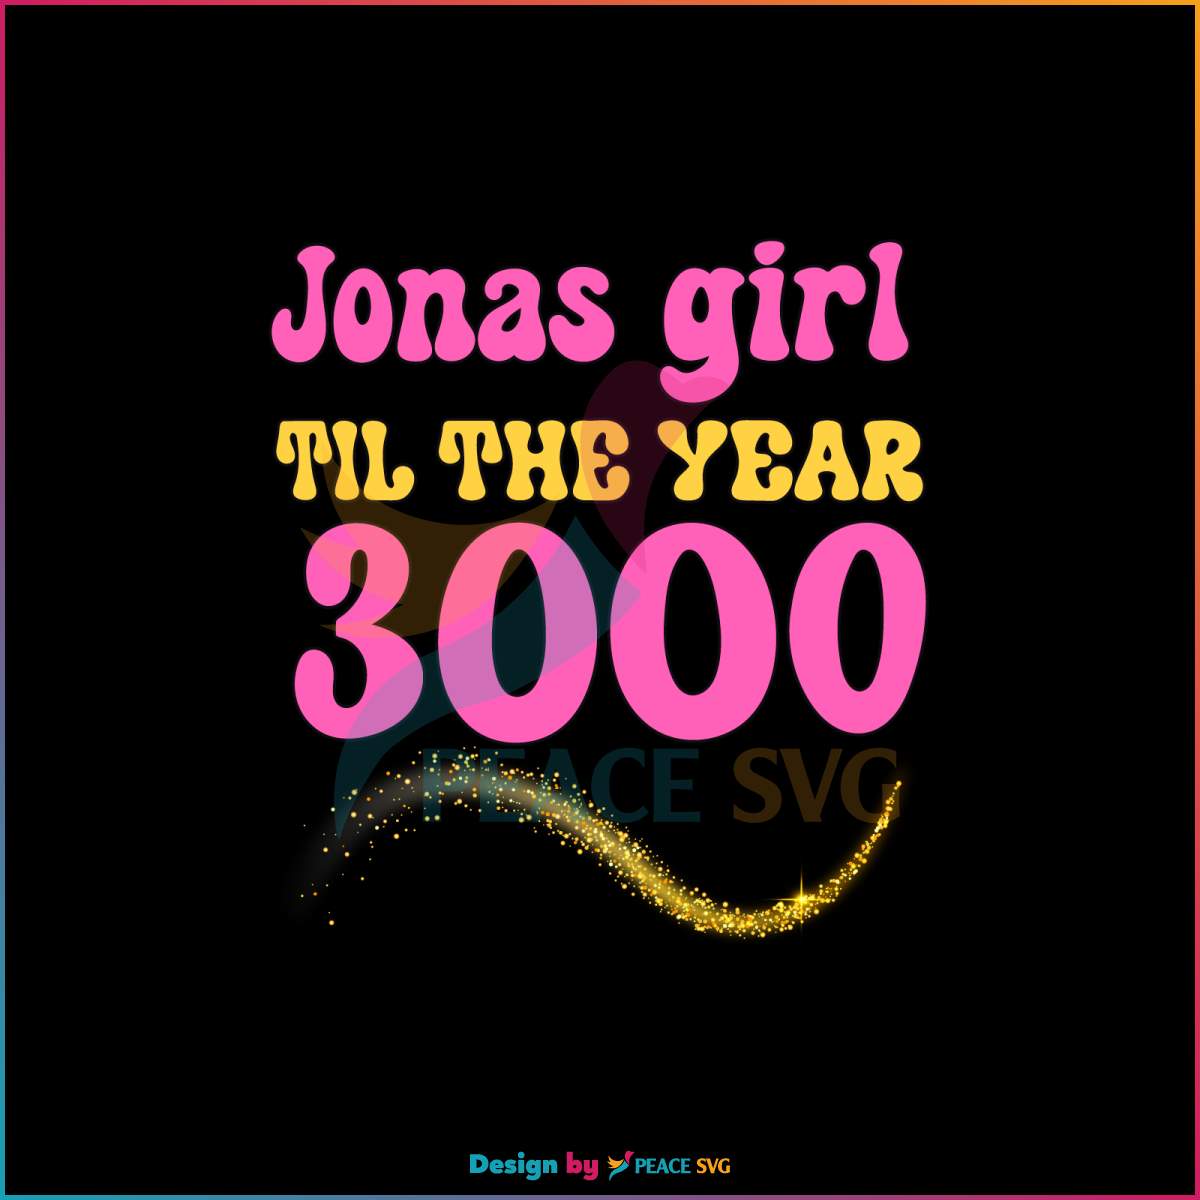 jonas-brothers-png-jonas-girl-til-the-year-3000-png-download